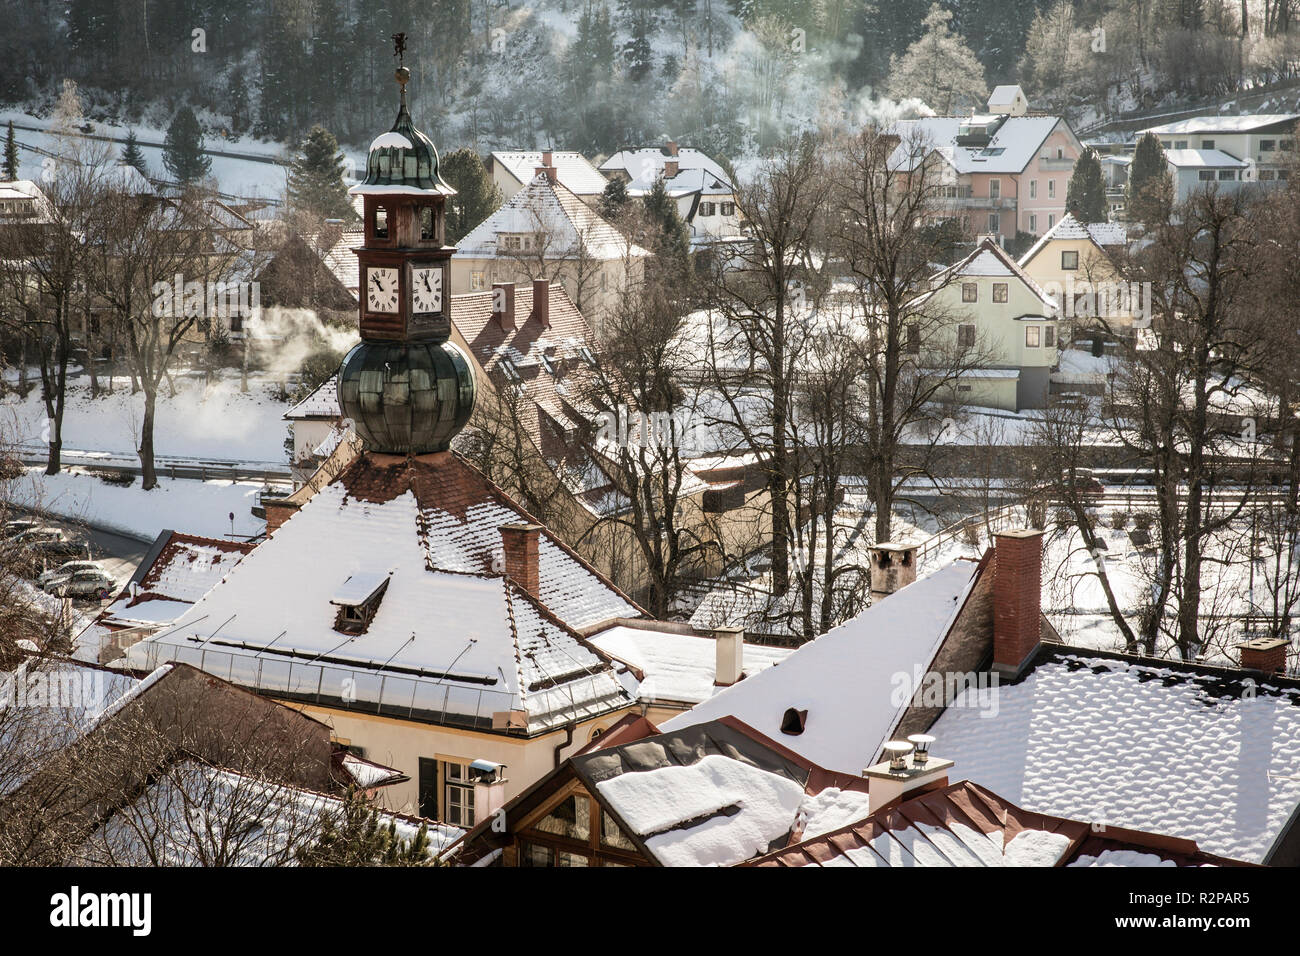 View of snow-covered town houses with smoking chimneys, from above, Murau, on a sunny winter day Stock Photo